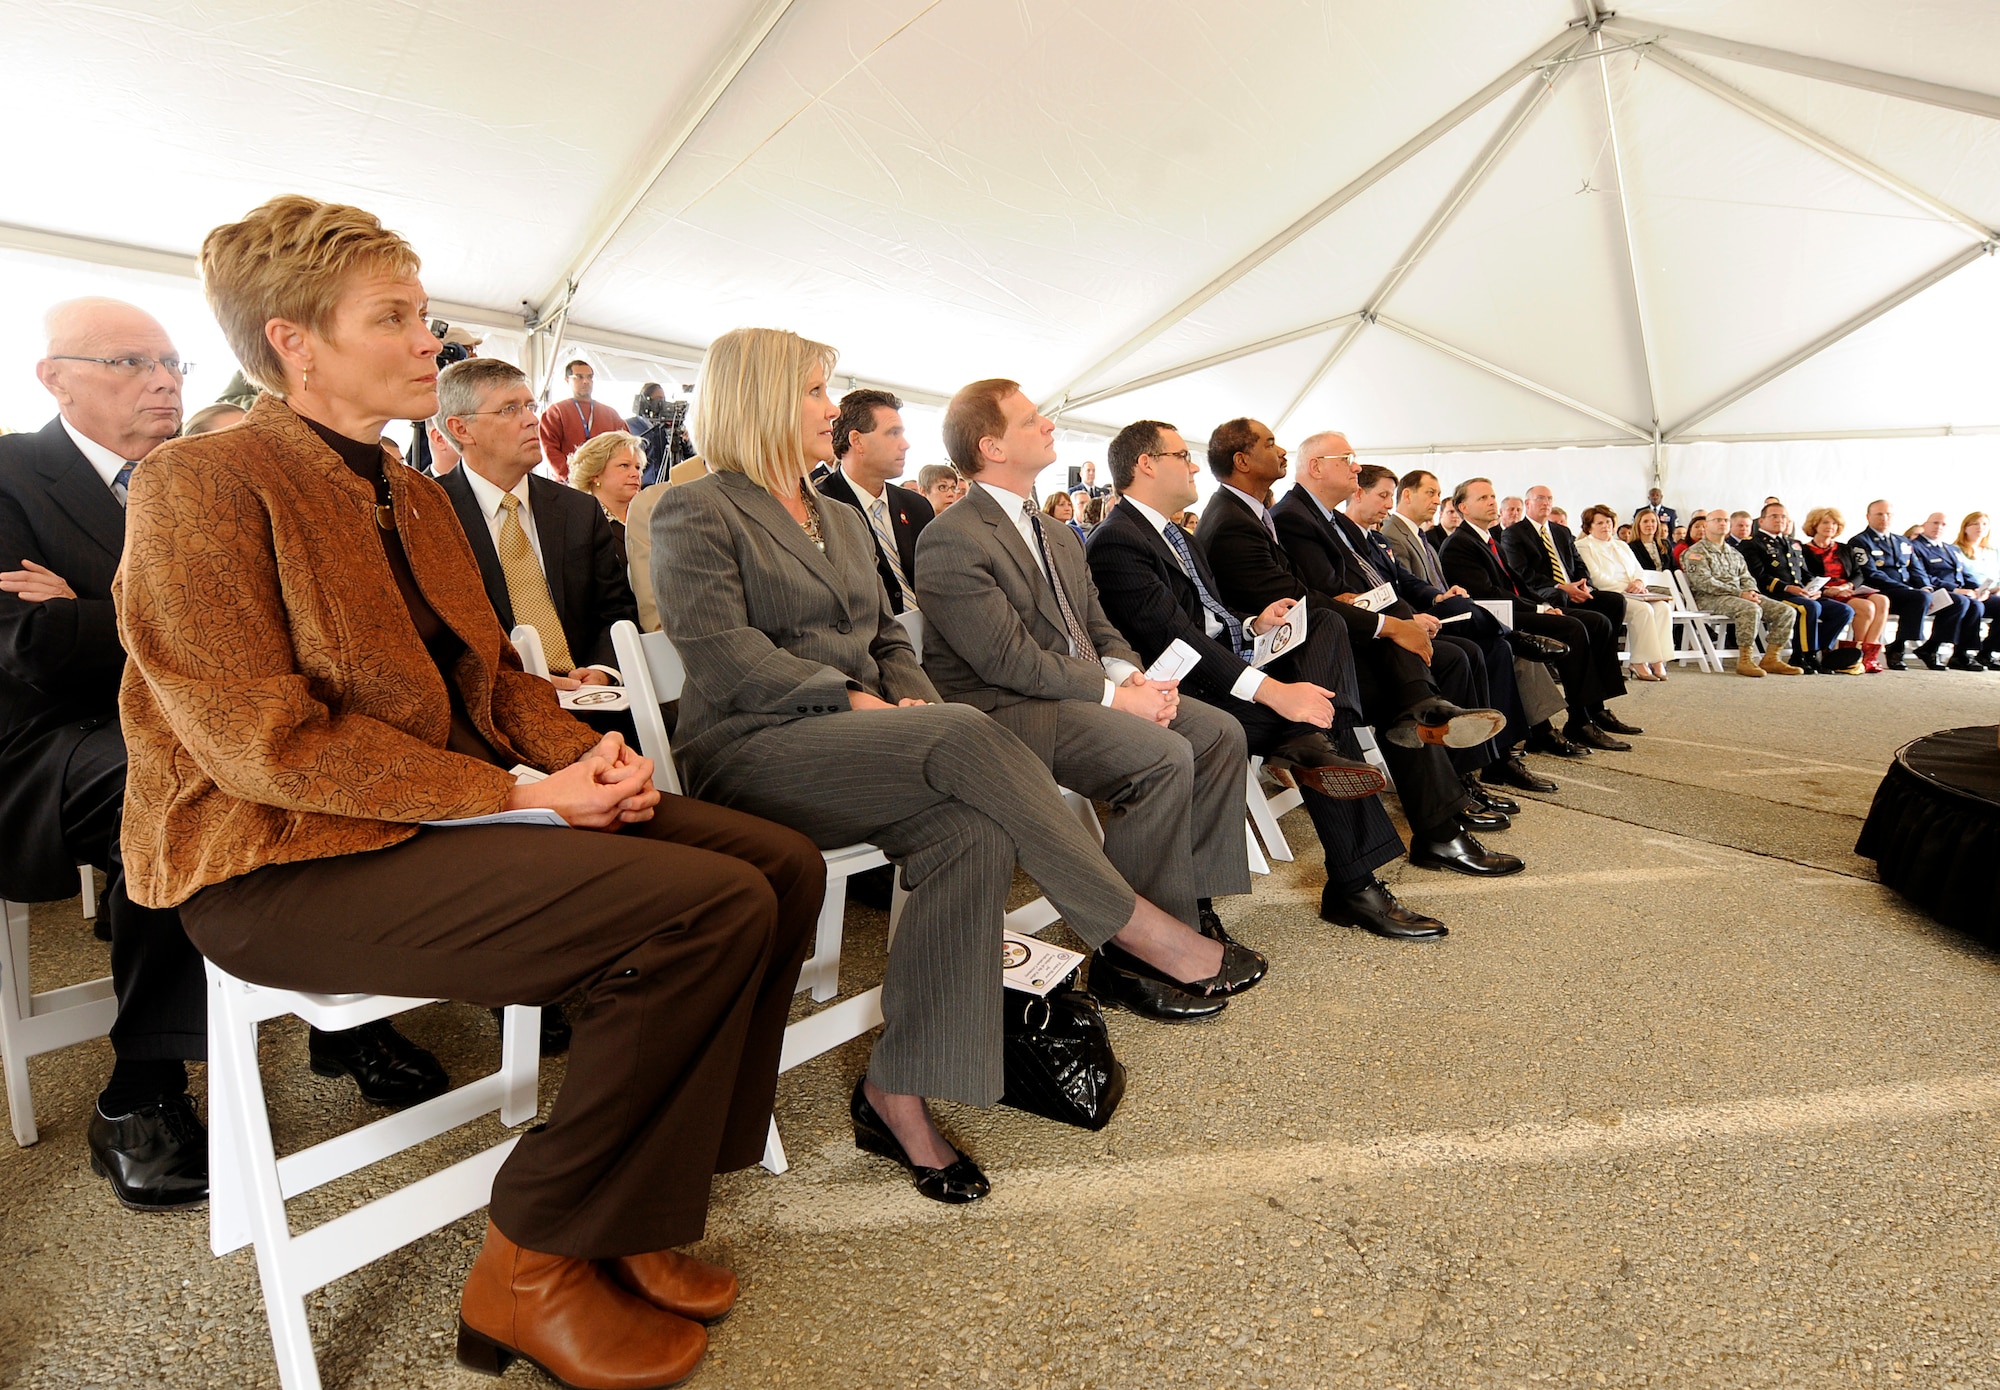 Gail Donley, wife of Secretary of the Air Force Michael Donley, and Suzie Schwartz, wife of Air Force Chief of Staff Gen. Norton Schwartz, listen to speeches during the Fisher House for Families of the Fallen dedication ceremony on Nov. 10, 2010, at Dover Air Force Base, Del.  The Fisher House Foundation built the 50th Fisher House at Dover to support families visiting the base for dignified transfers of their loved ones.  (U.S. Air Force photo/Scott M. Ash)